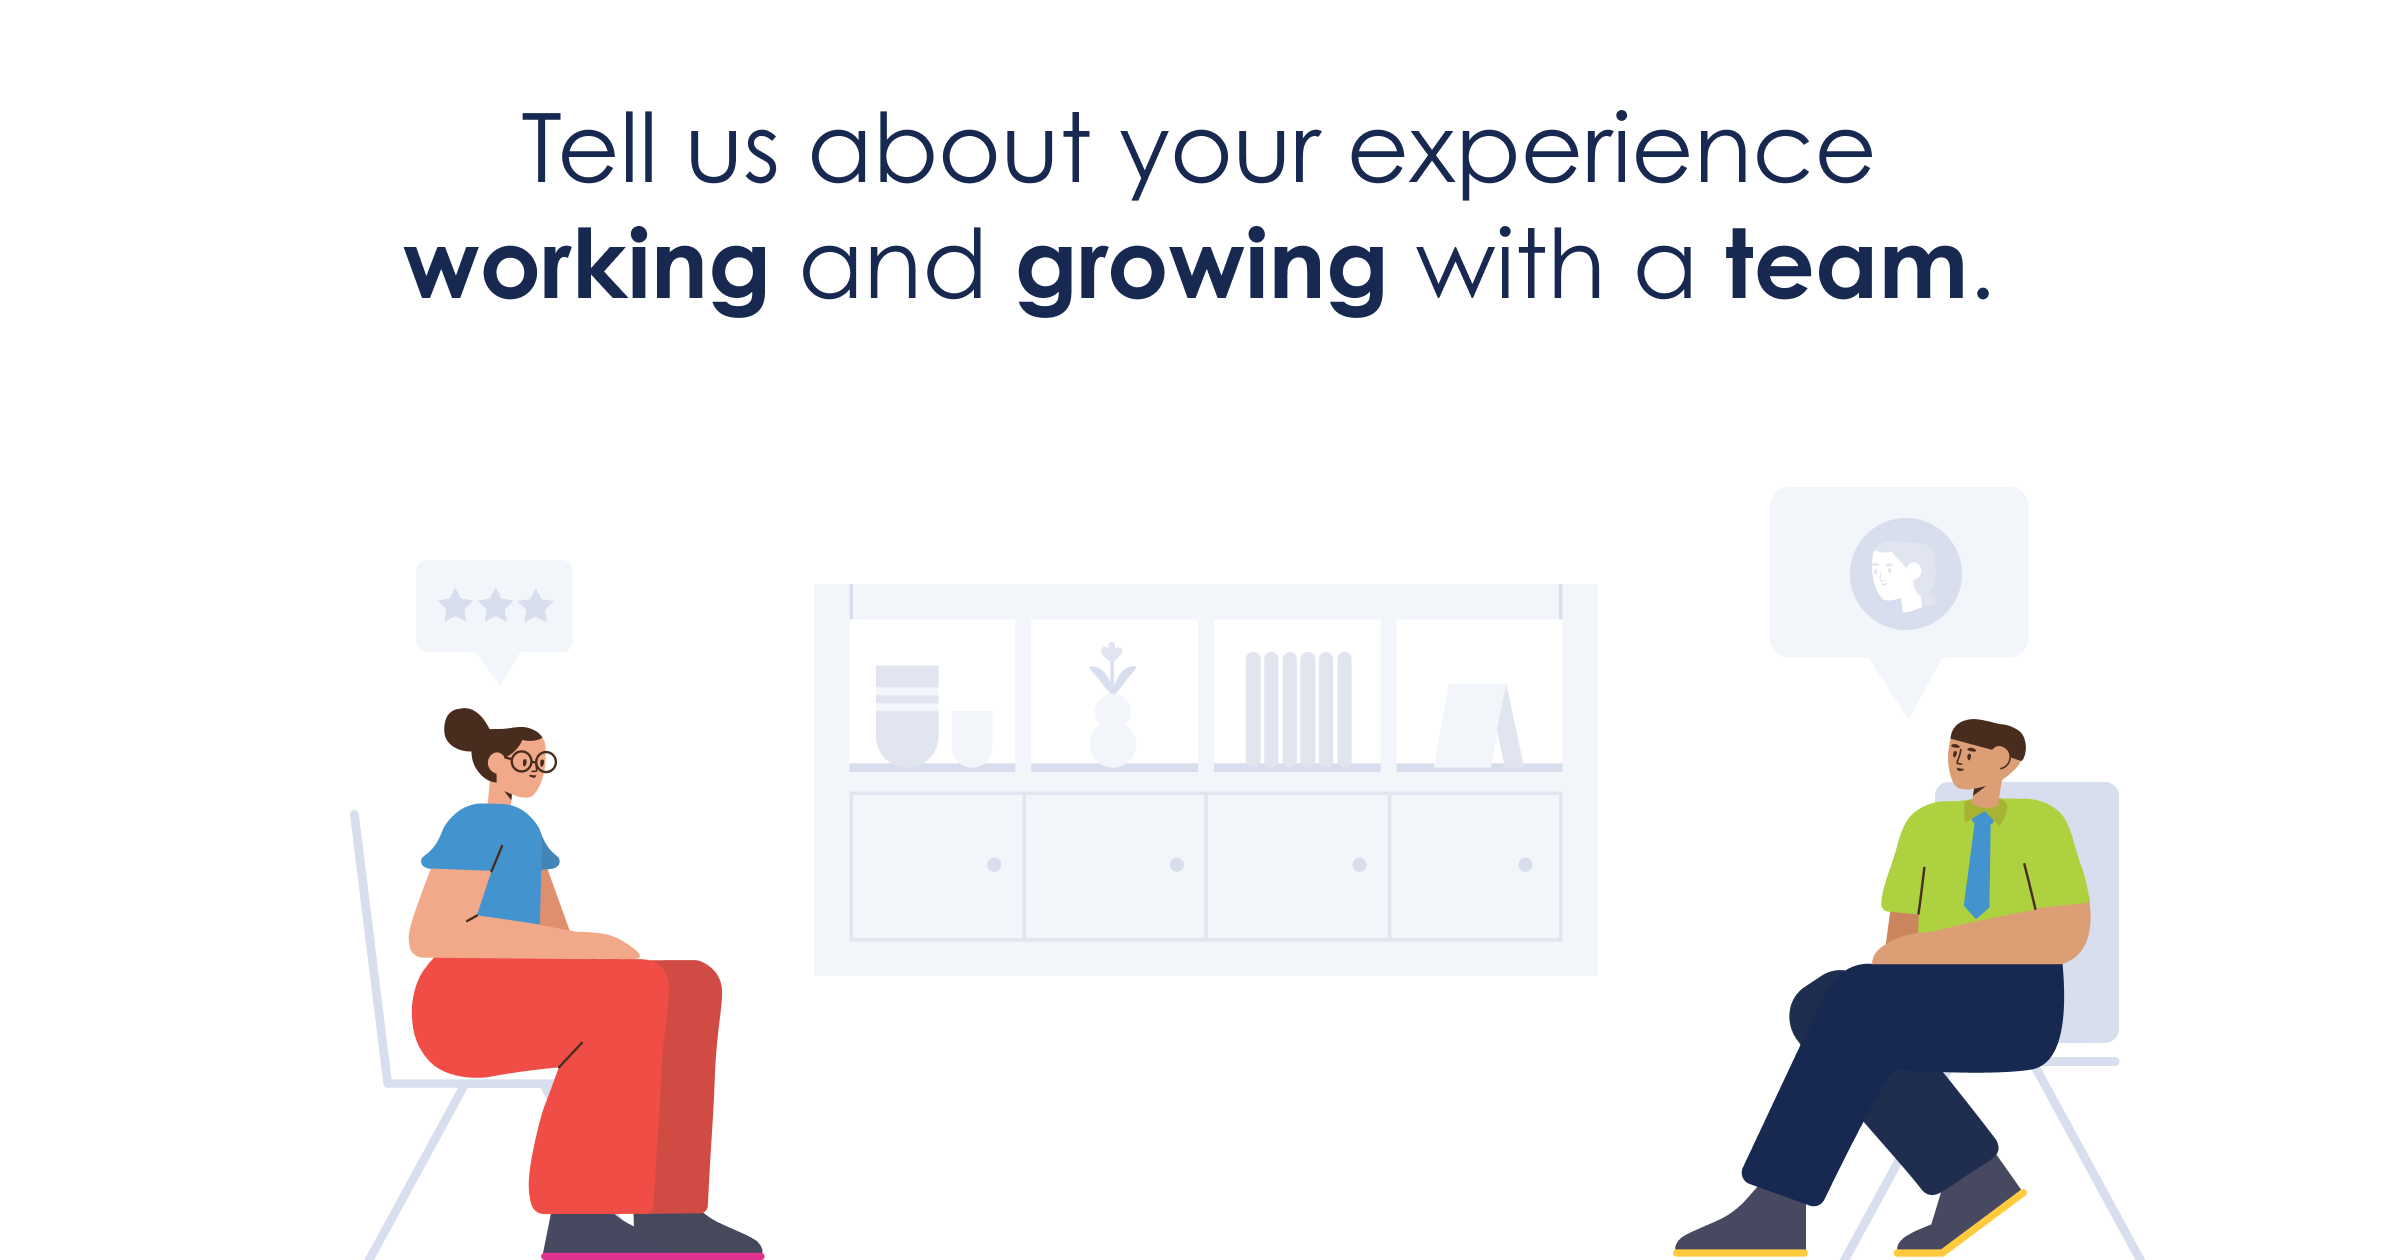 Tell us about your experience working and growing with a team